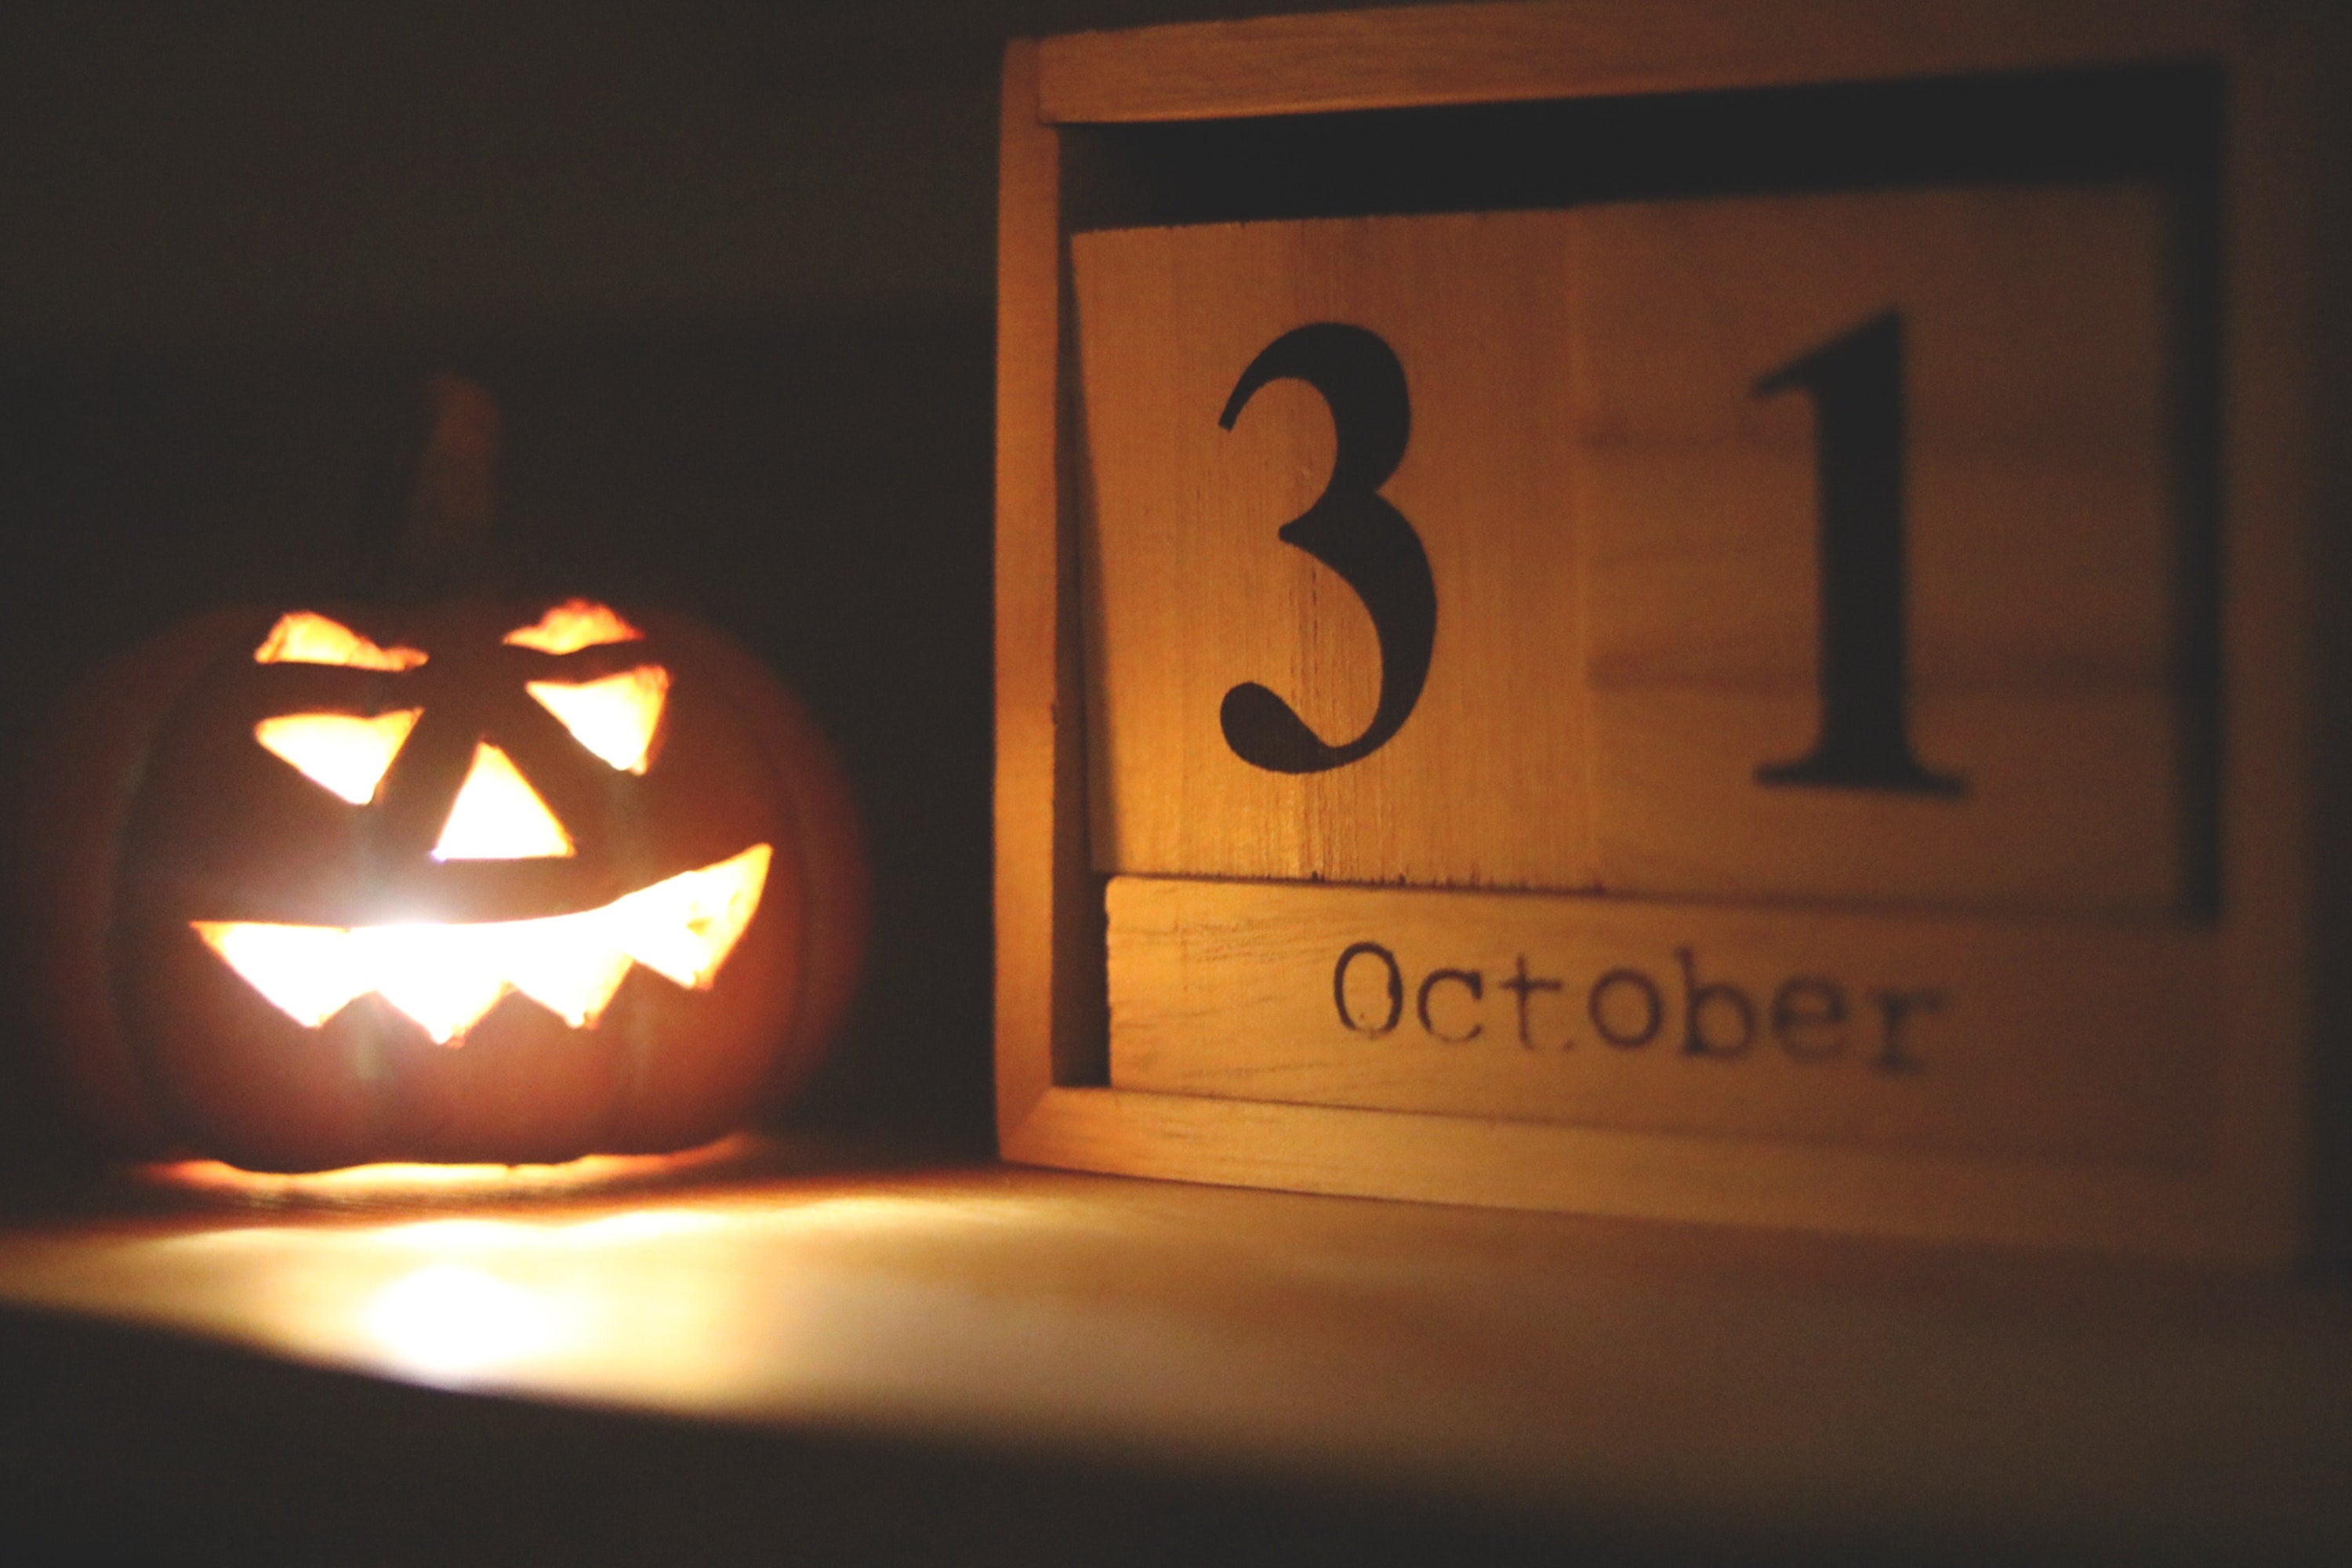 Glowing carved pumpkin next to a wooden calendar showing the date 'October 31'